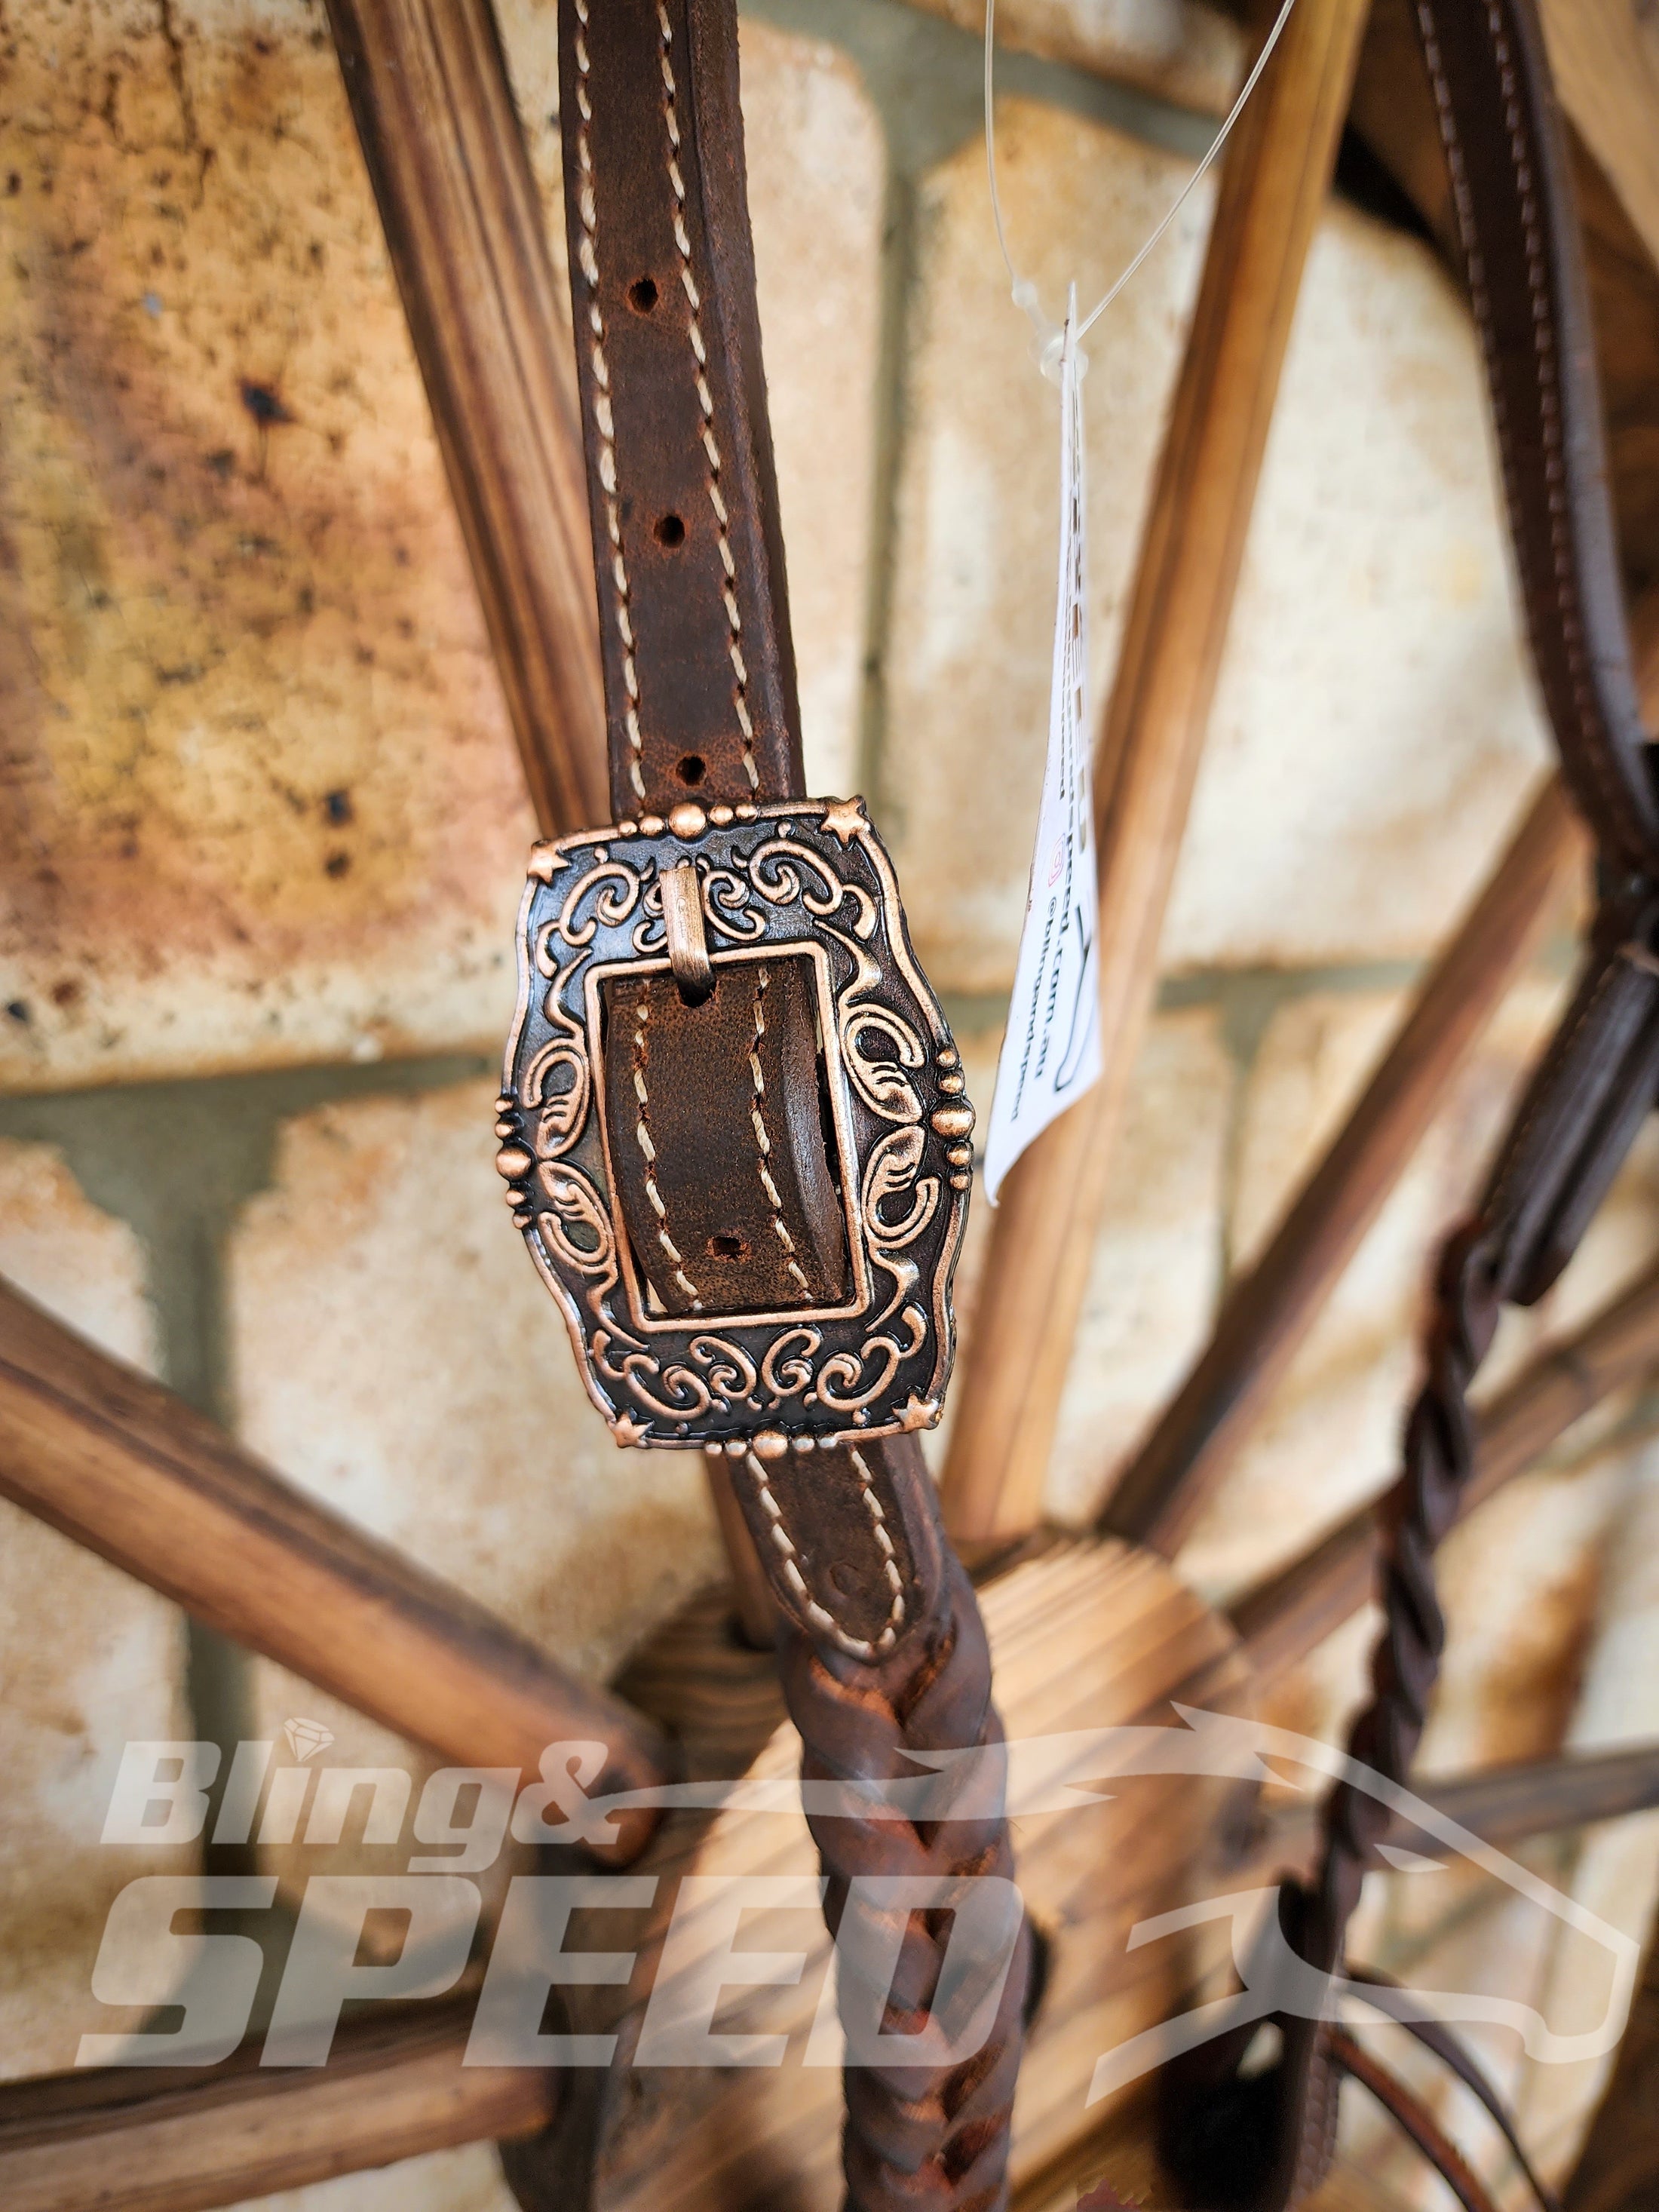 Bling & Speed Plait One Ear Bridle